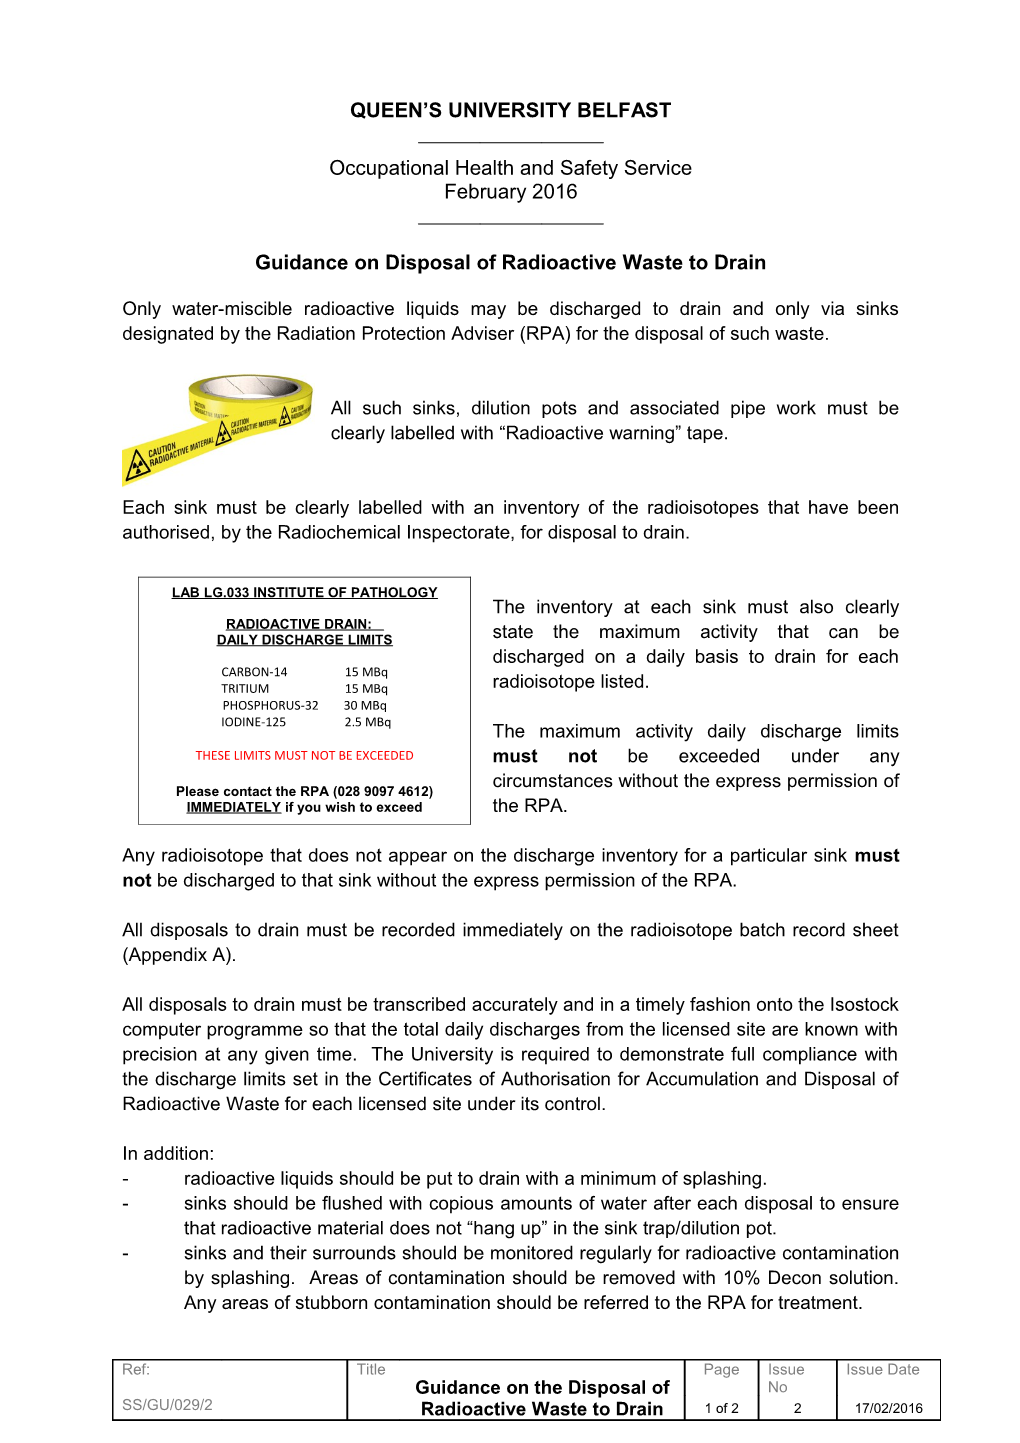 Guidance on Disposal of Radioactive Waste to Drain